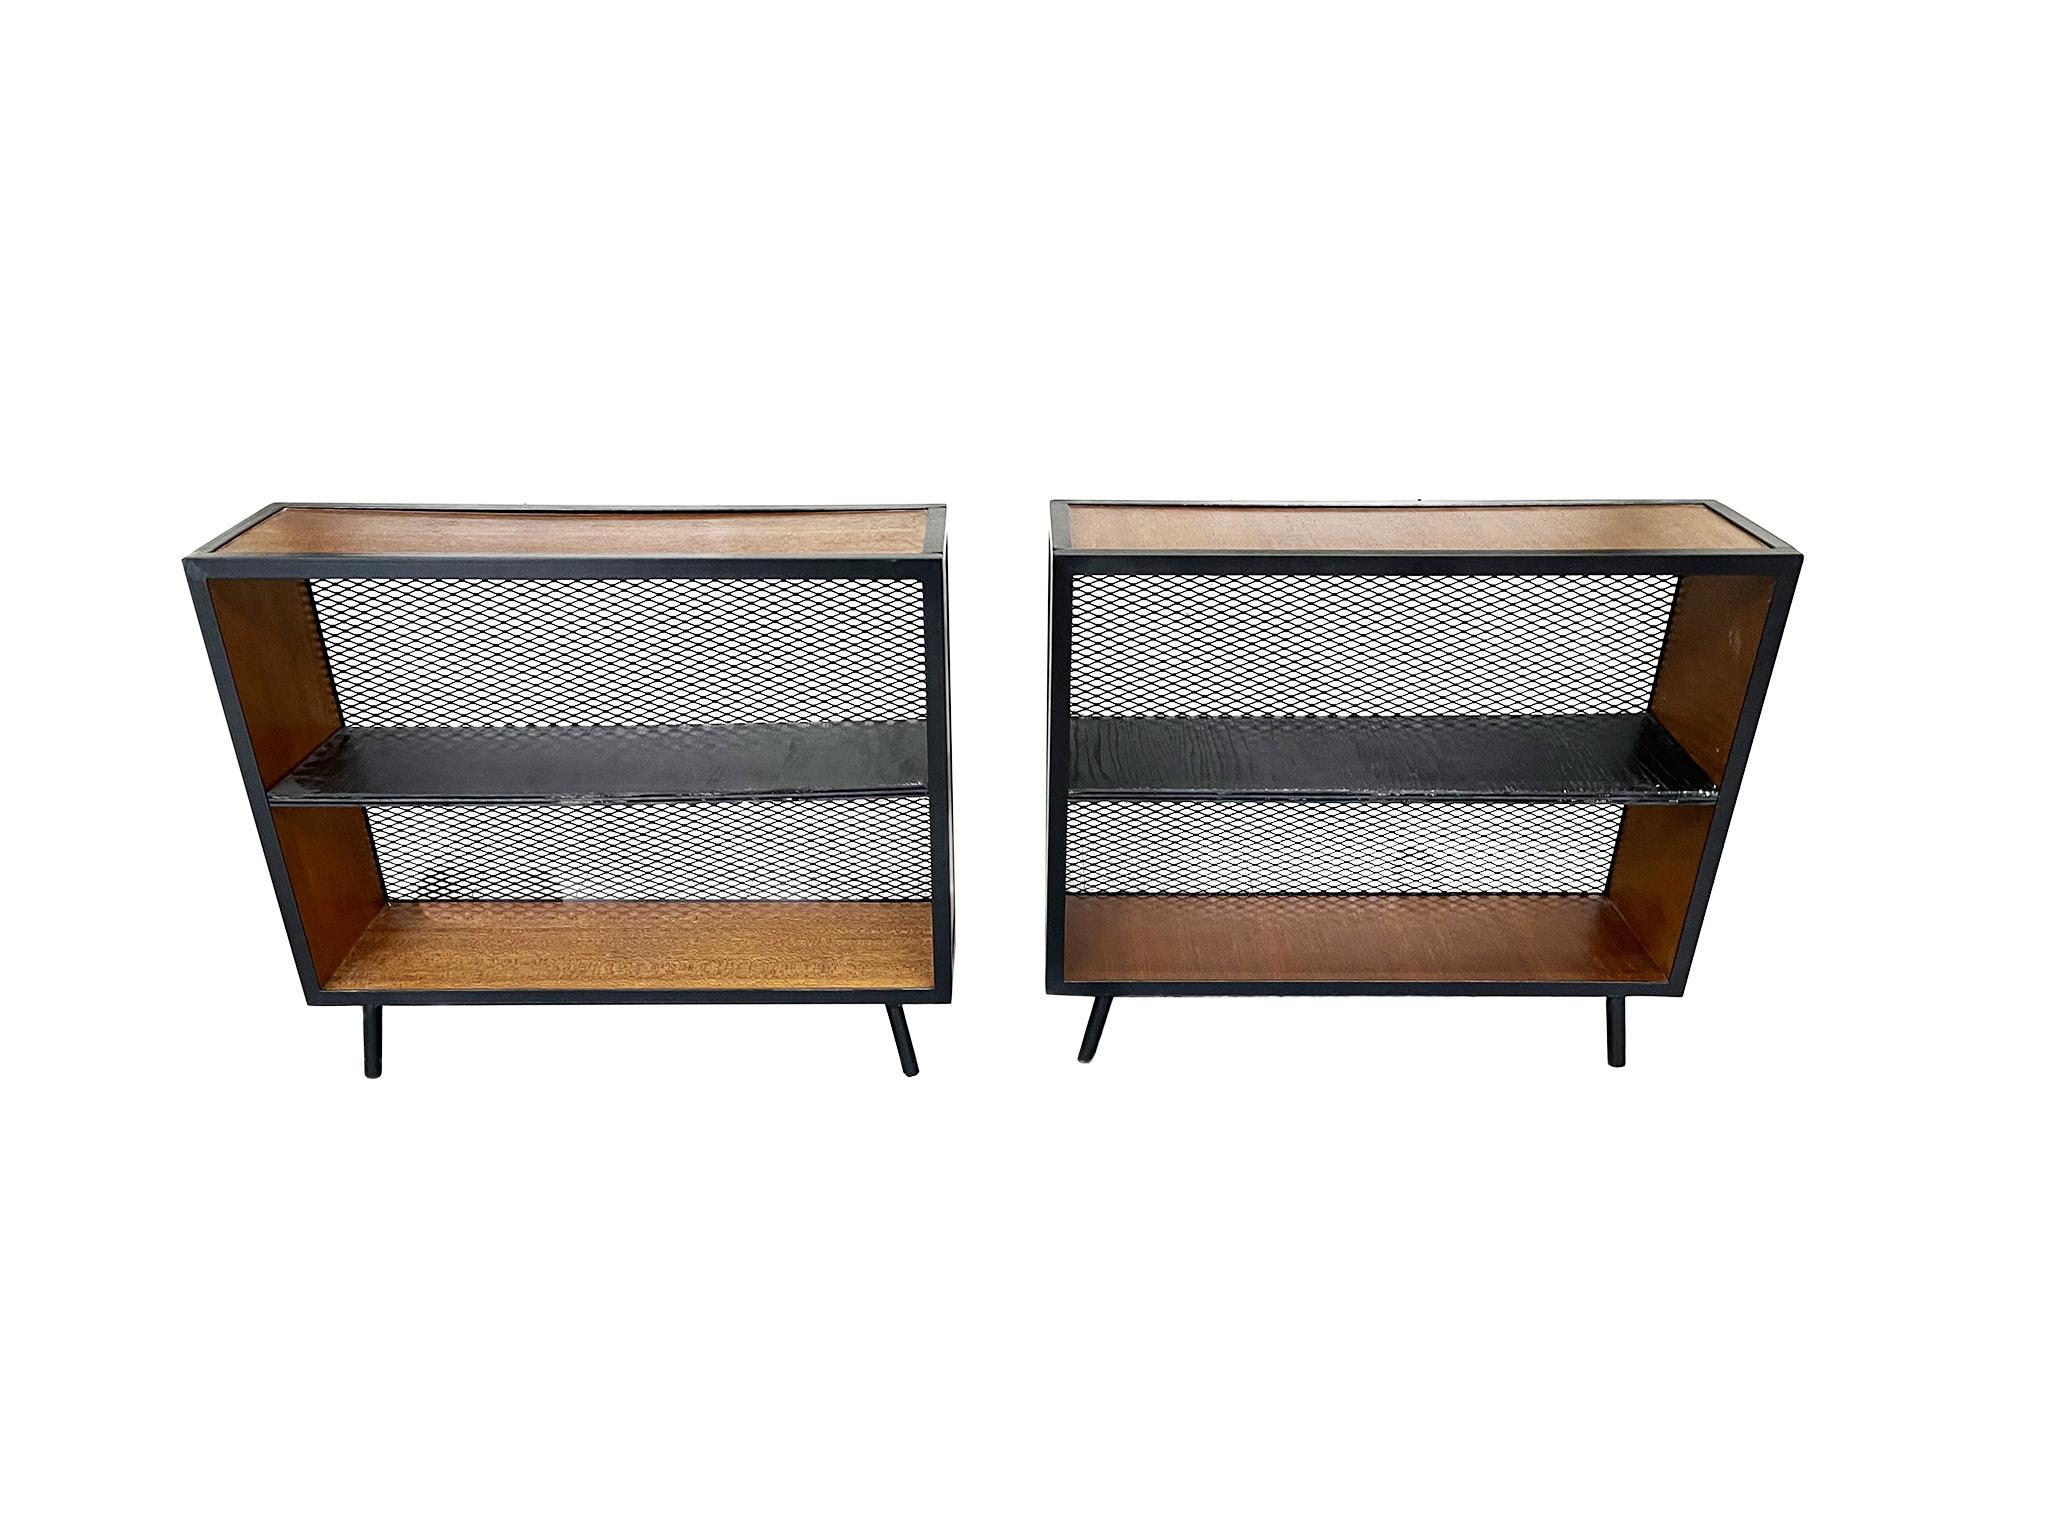 Made in the 1950s, this pair of bookcases is designed with balance and airiness in mind. They are comprised of angle iron frame, plywood with birch veneer, and black, cerused wooden shelves. They have been newly refinished.

Dimensions:
36 in.